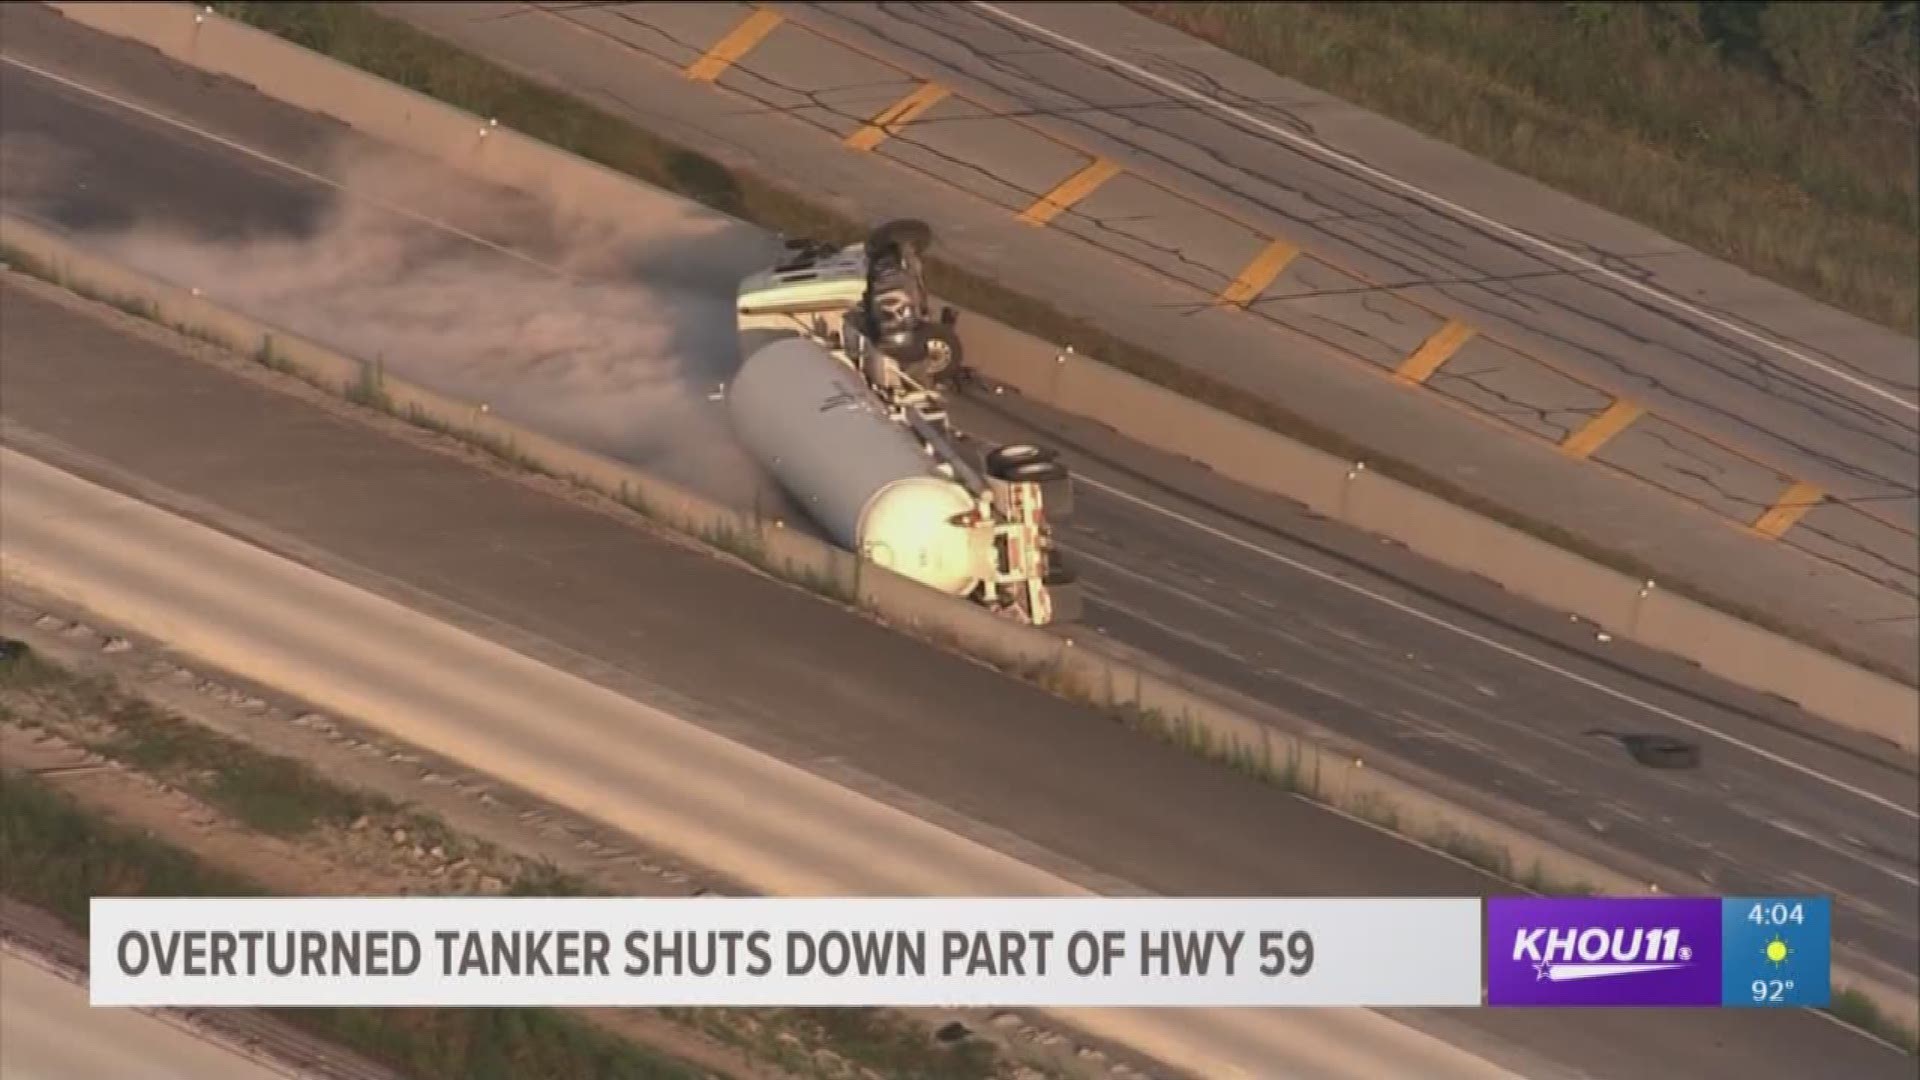 After a tanker overturned, spilling a flammable gas on US 59 early Wednesday morning, the interstate was shut down for most of the day.